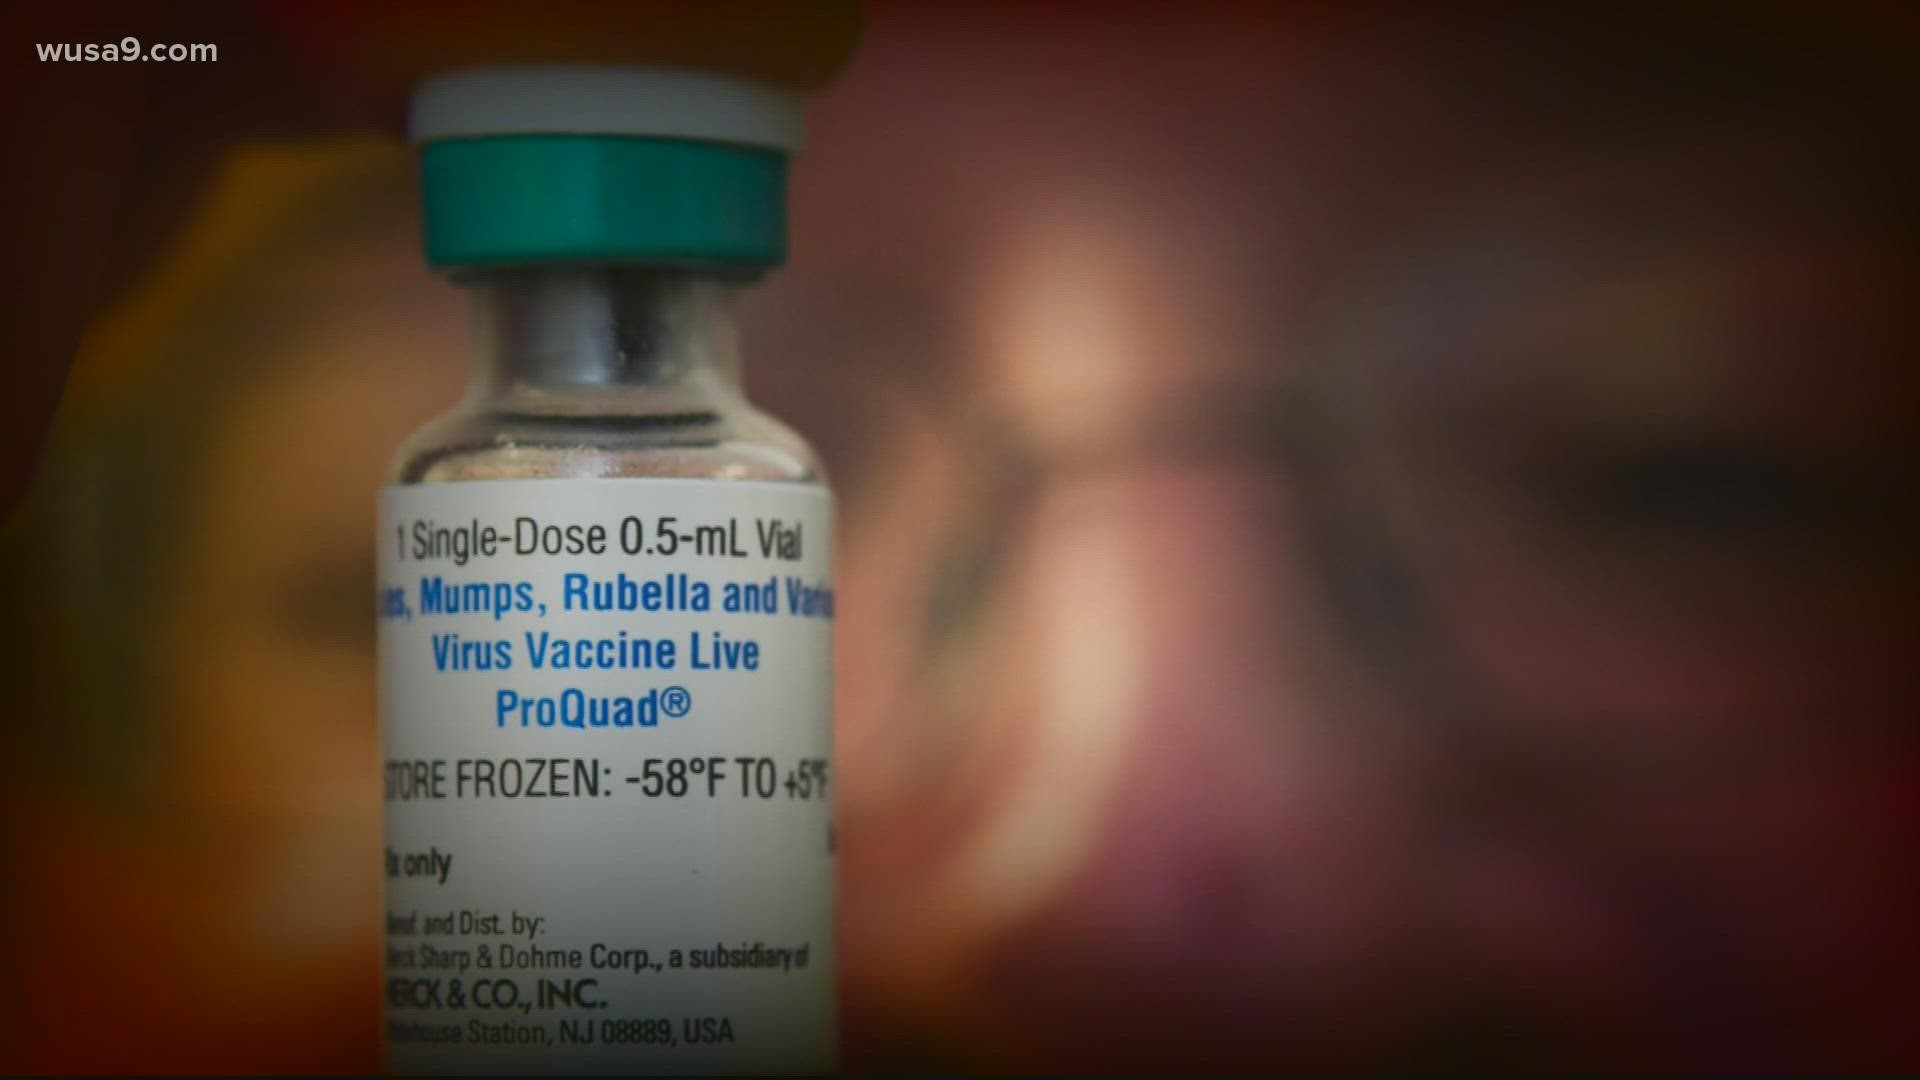 While children under 12 cannot get the COVID vaccine, one Maryland doctor is worried about kids skipping other routine vaccinations.